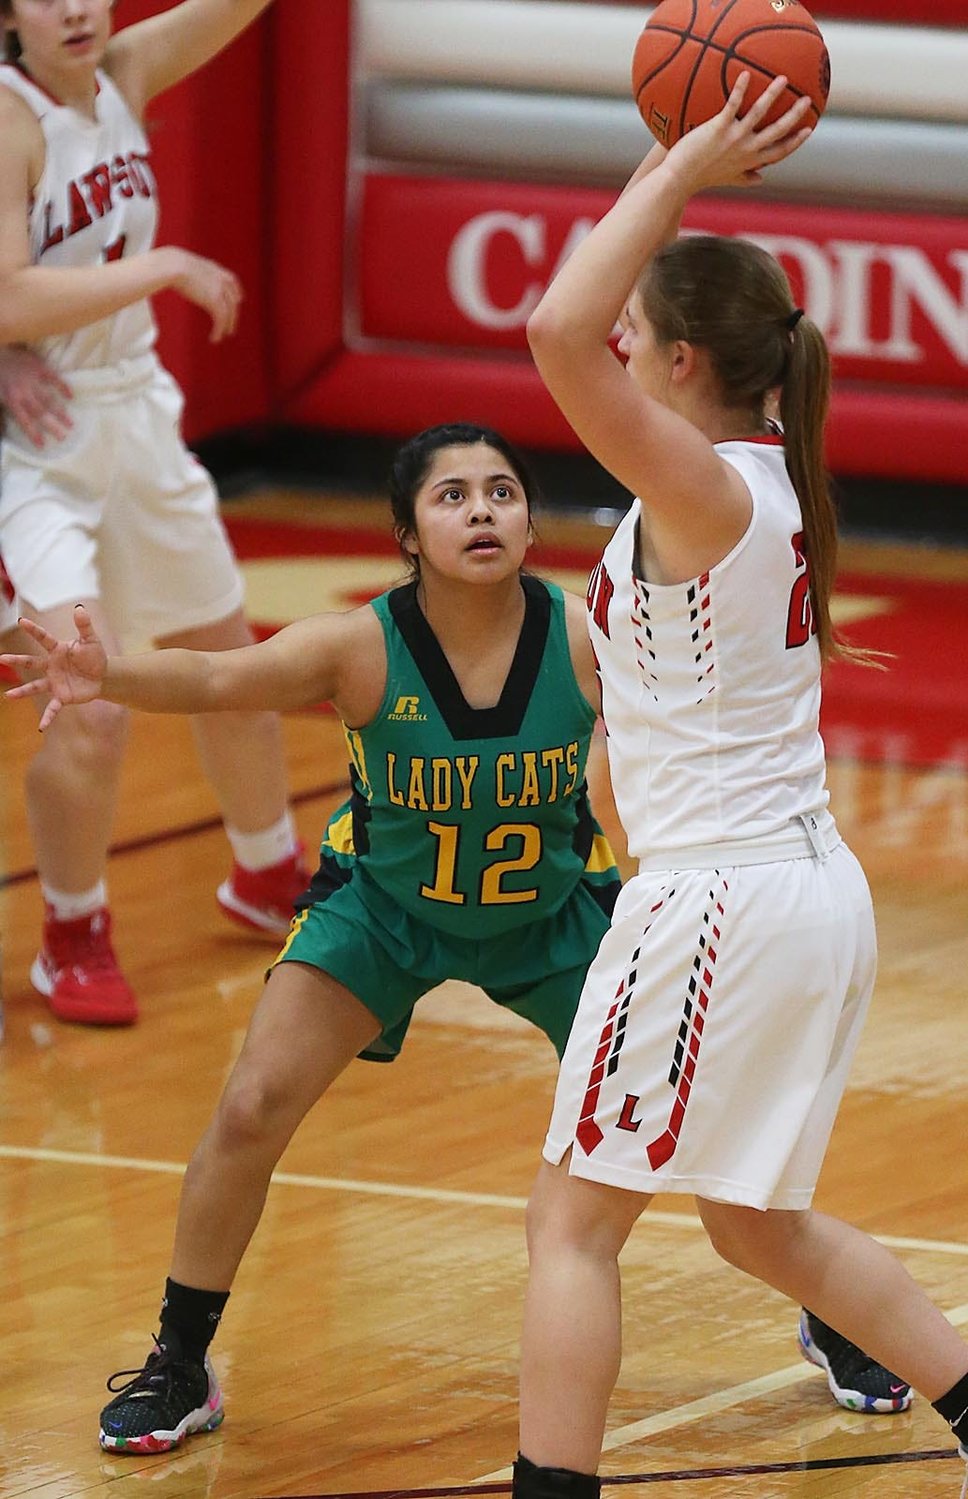 Milan’s Janissa Martinez competes Wednesday evening during Sectional Basketball at Lawson High School.